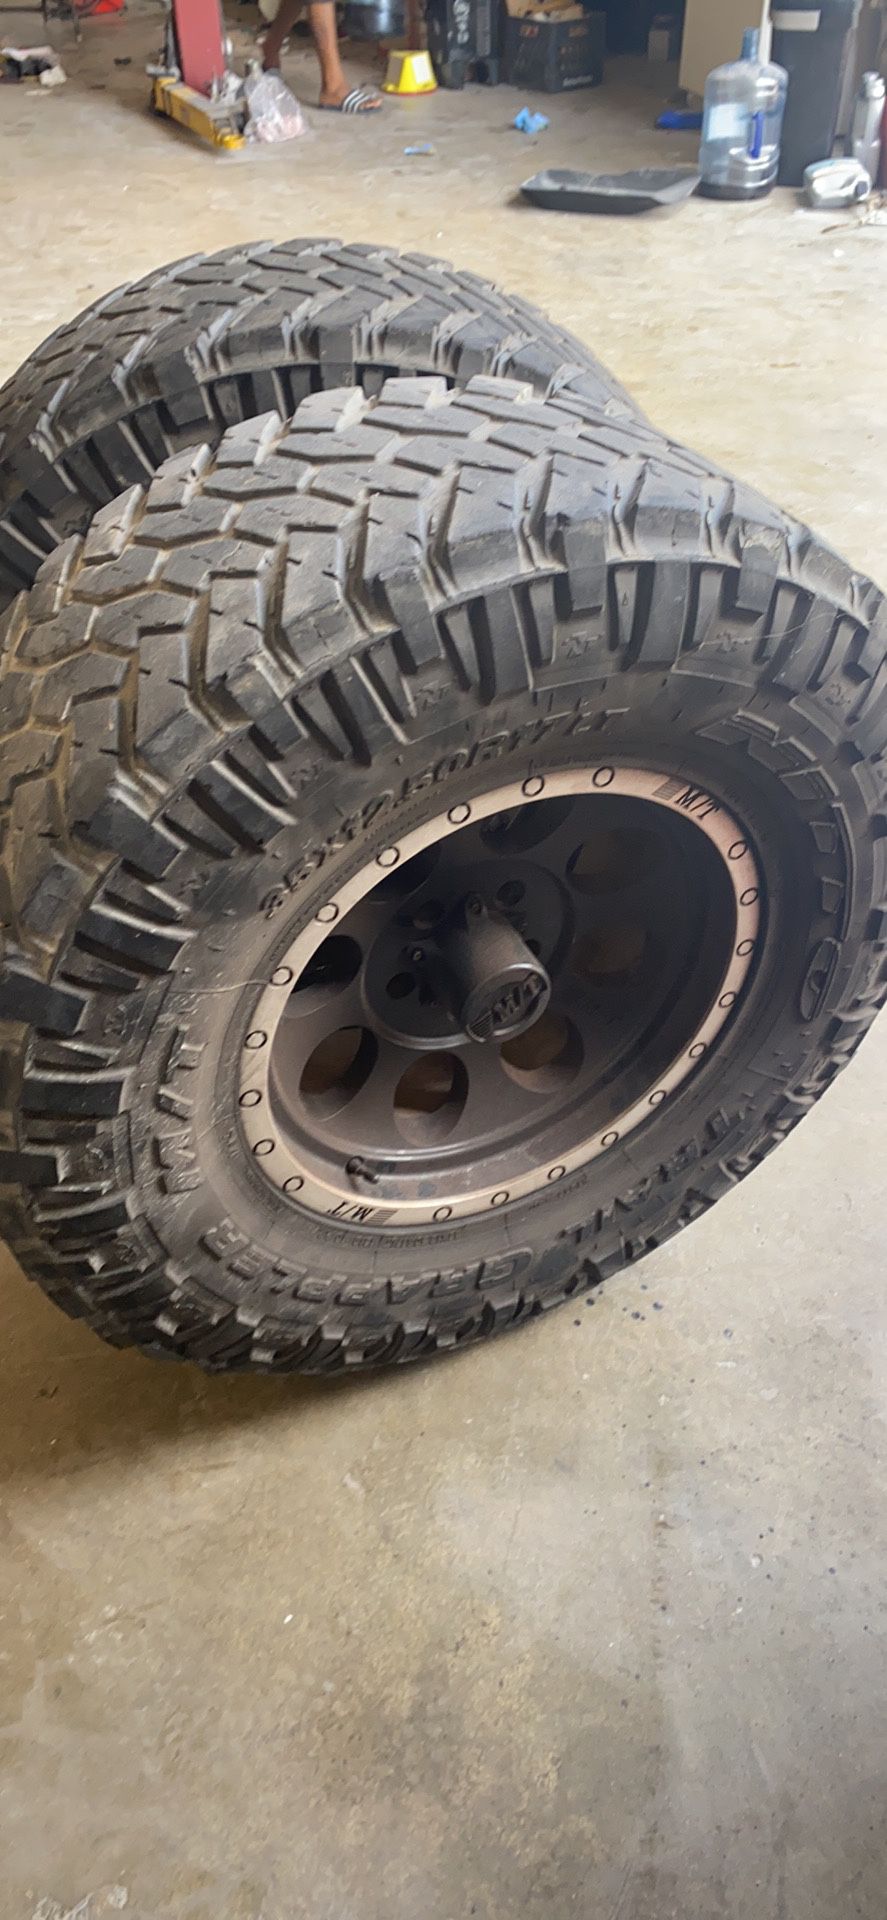 Jeep Wrangler wheels n tires. $700 firm